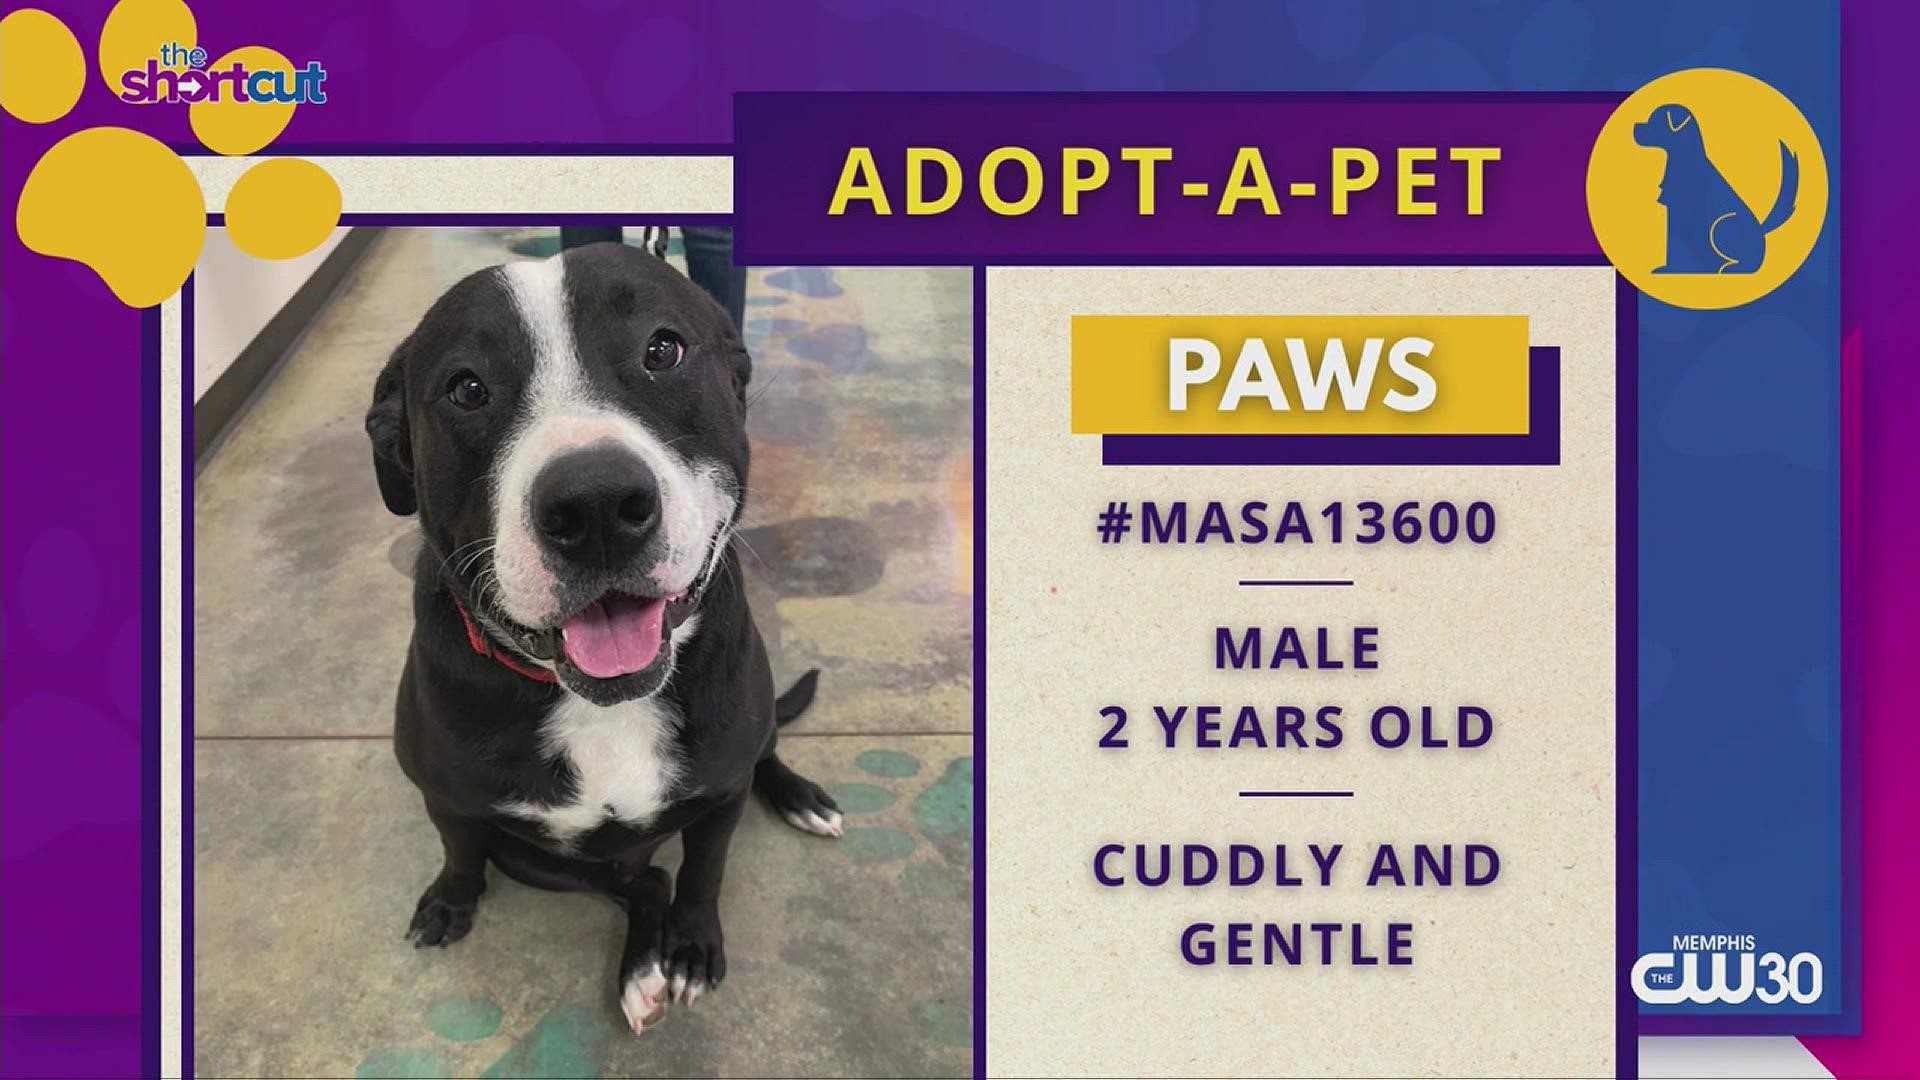 Whether you're looking to adopt a sweet and cuddly dog like Paws from MAS or become a foster pet parent, check out what "The Shortcut" is offering for this week!